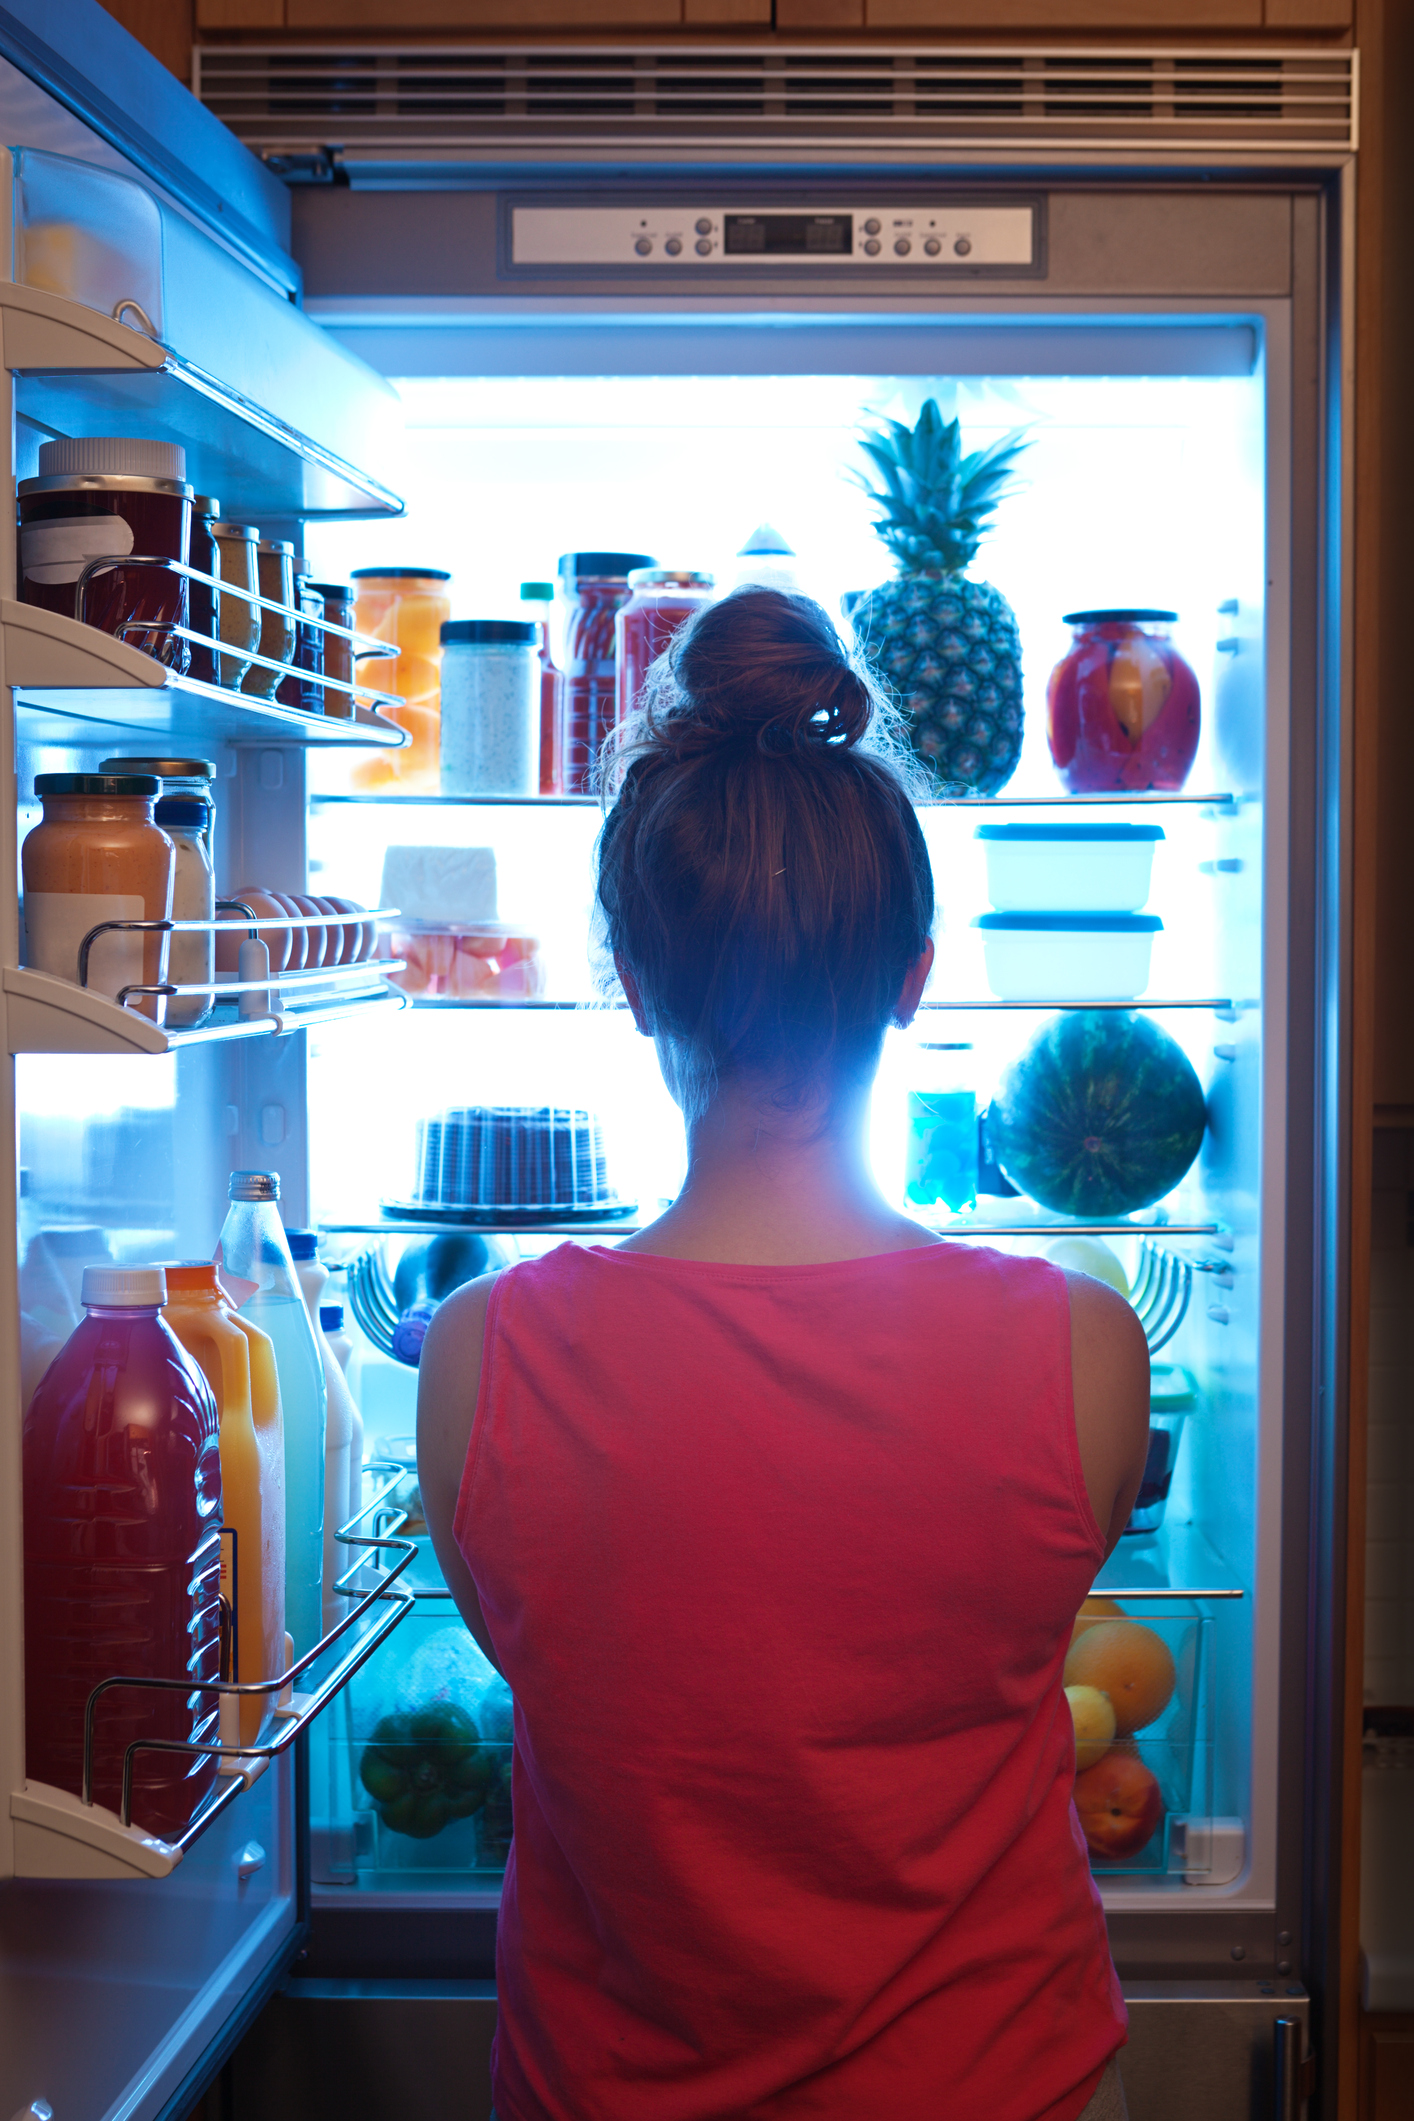 PHOTO: A woman is pictured standing in front of the open refrigerator late at night in this undated stock photo.